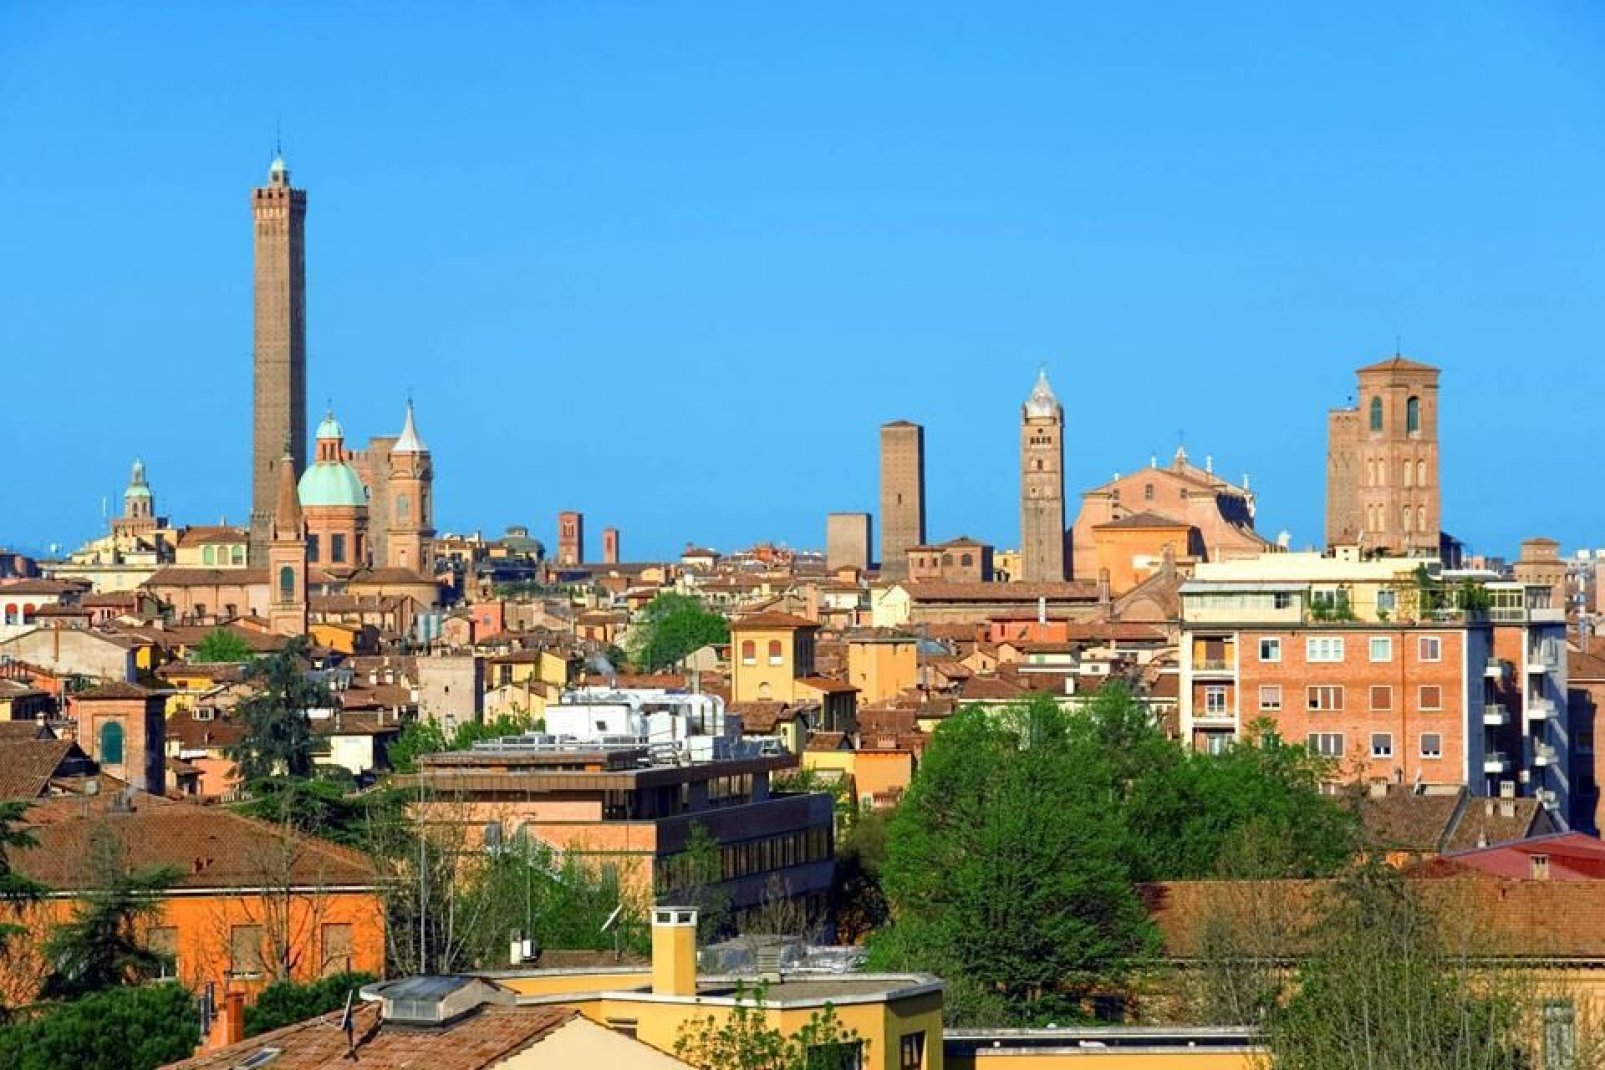 Bologna is home to one of the oldest universities in Europe. This city, 'European Capital of Culture' in 2000 and a "UNESCO City of Music" since 2006, is an important cultural centre.